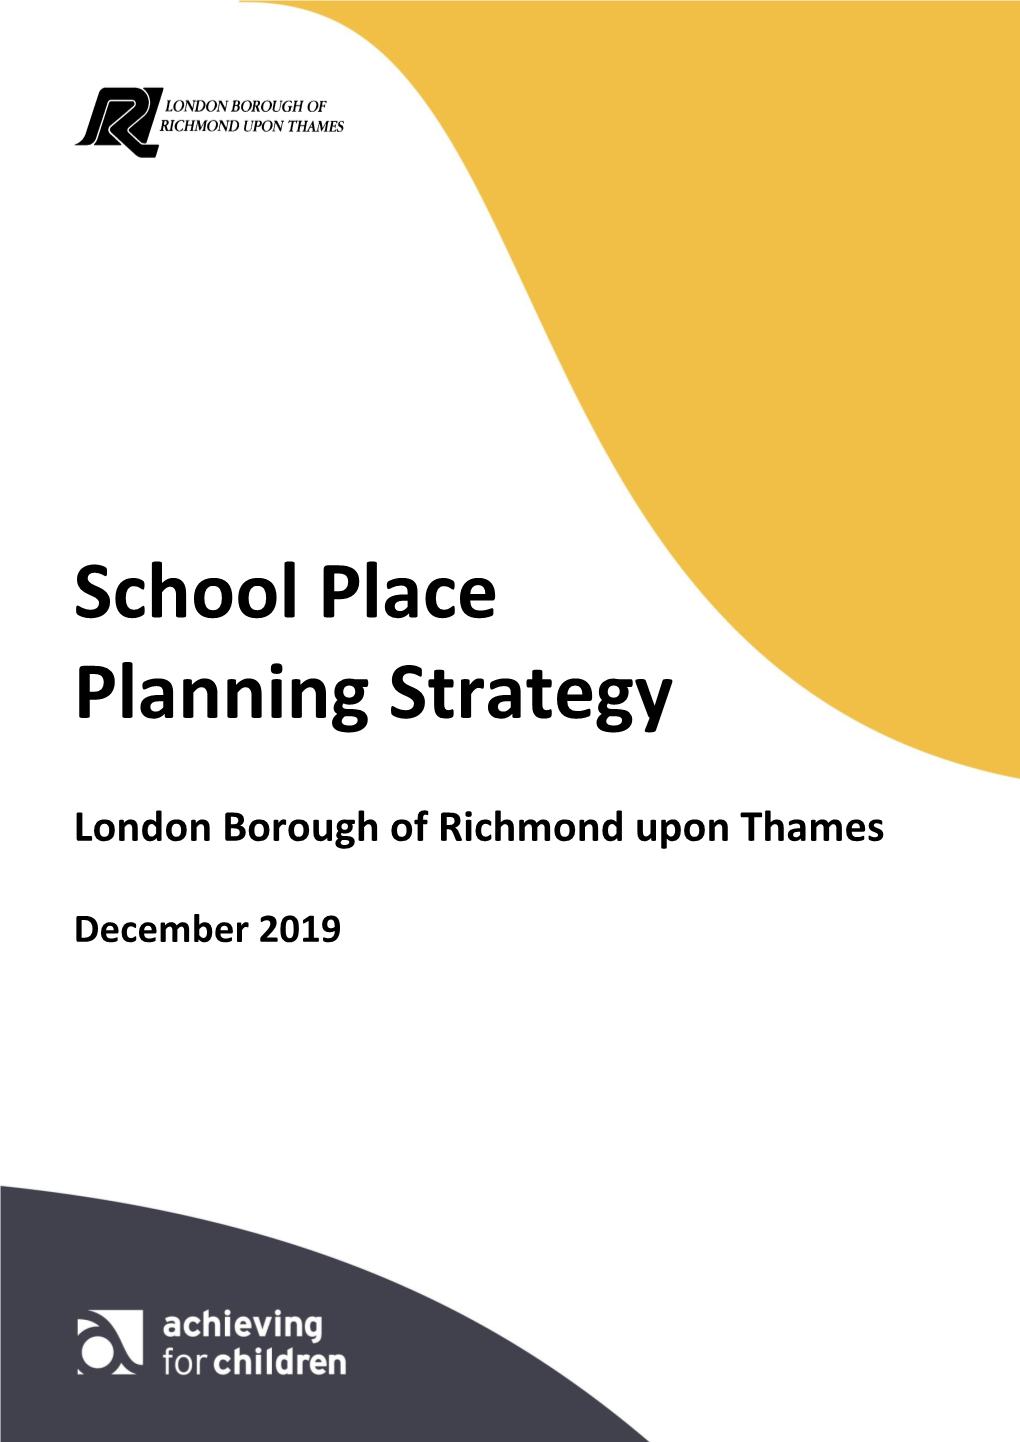 School Place Planning Strategy